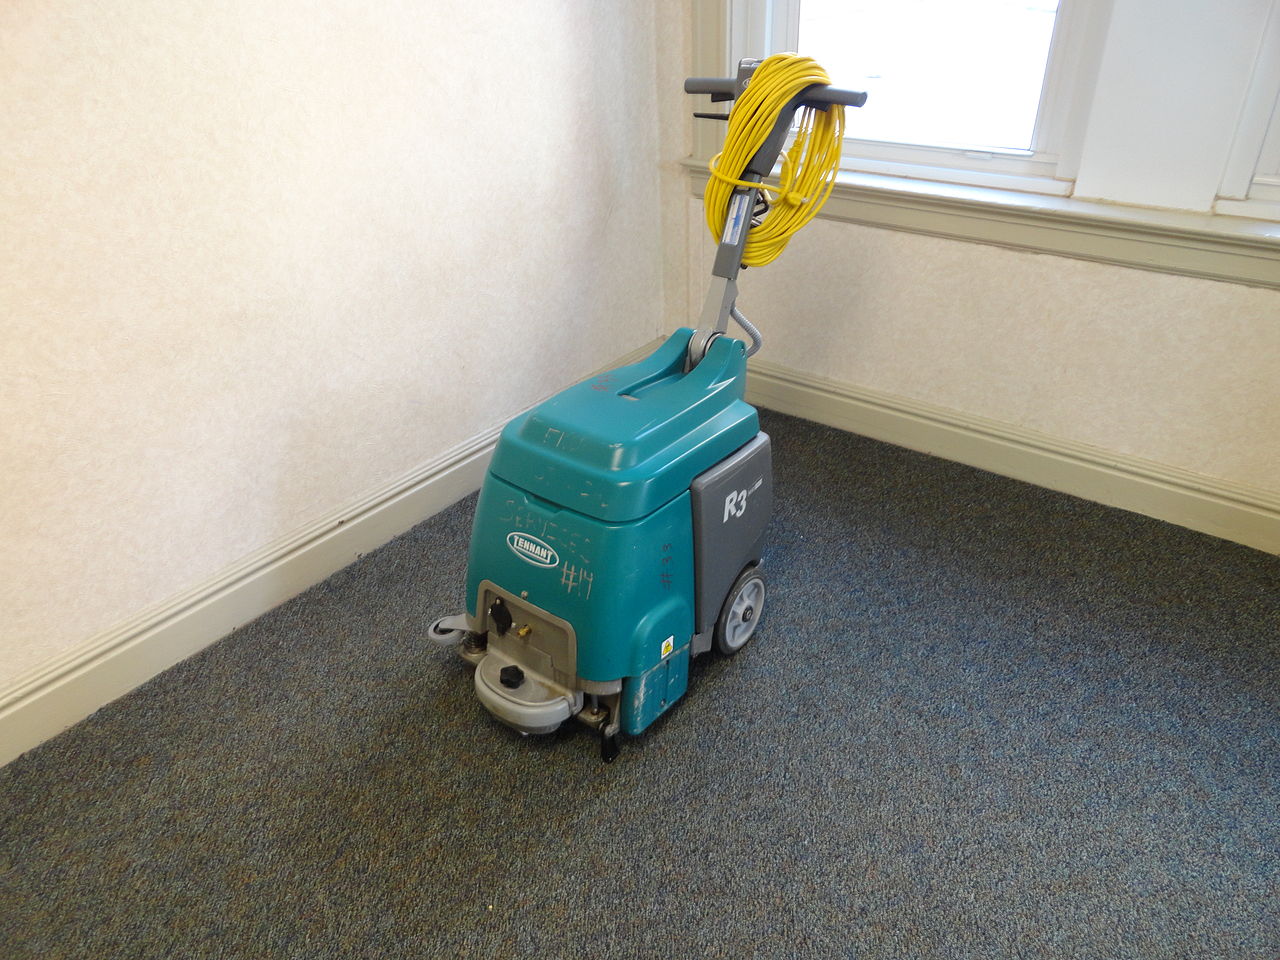 Carpet cleaning machine kept after operation